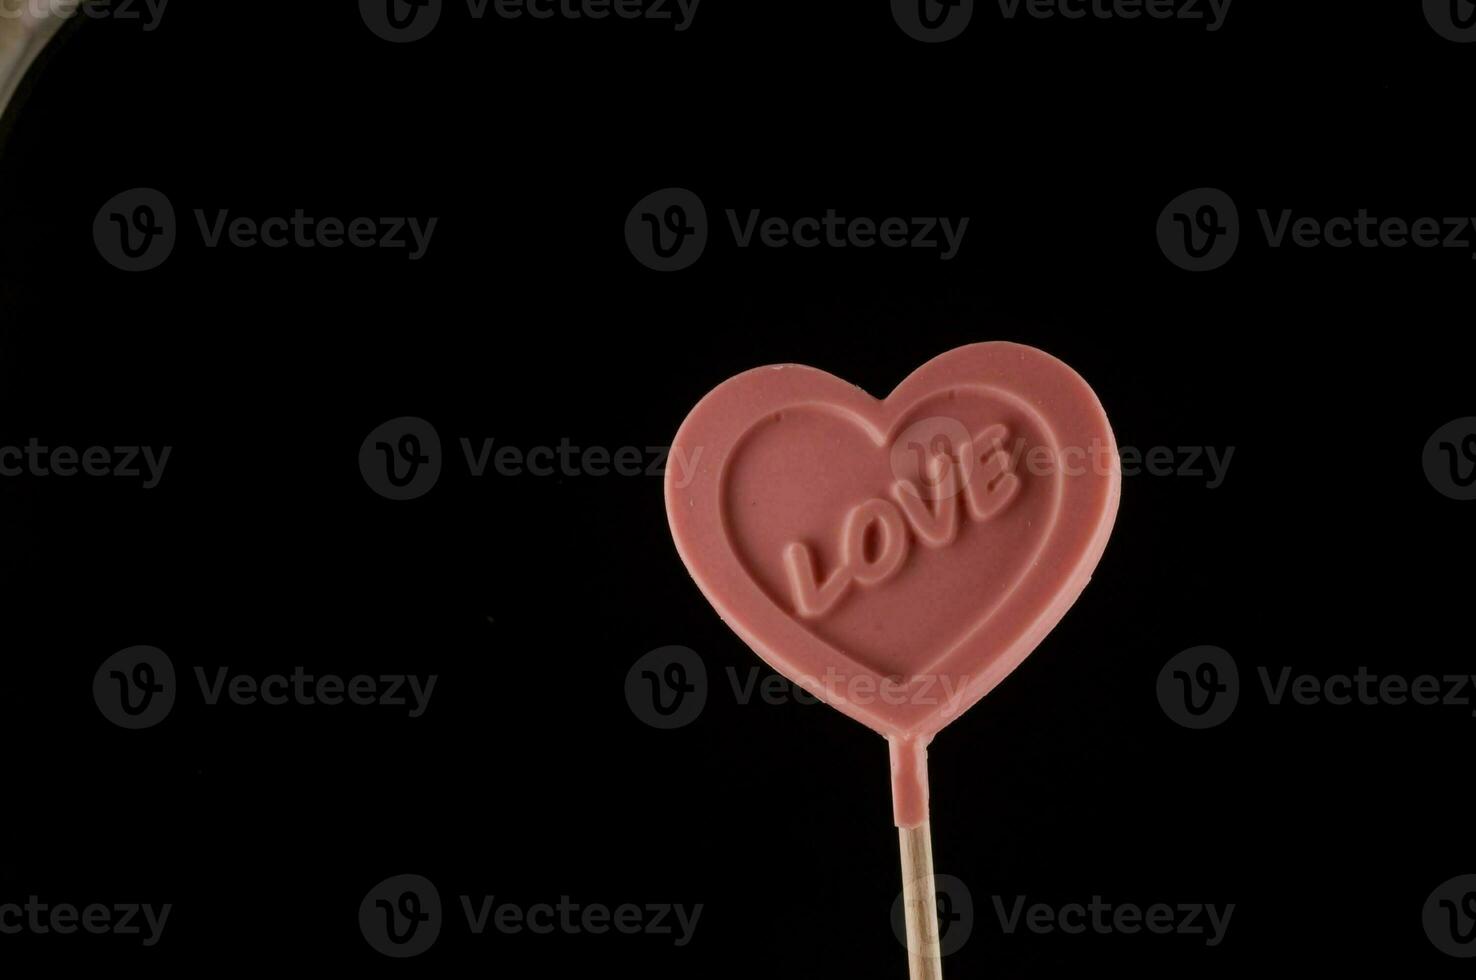 a pink heart shaped lollipop with the word love written on it photo